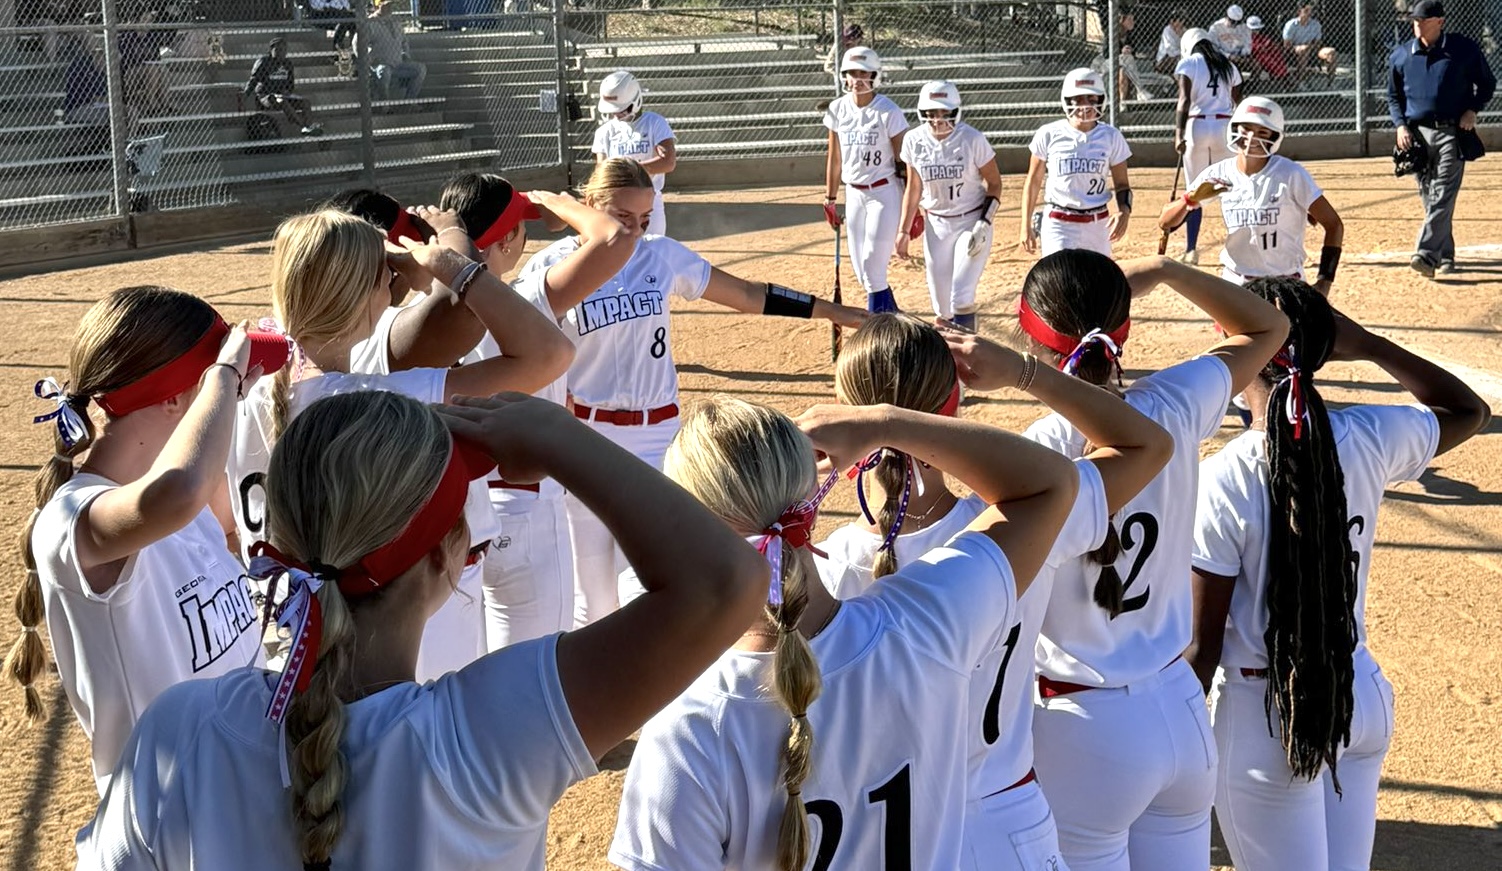 The Georgia Impact - Taylor 16U is one of only eight teams what went 6-0-0 in Boulder IDT pool play heading into Saturday bracket competition